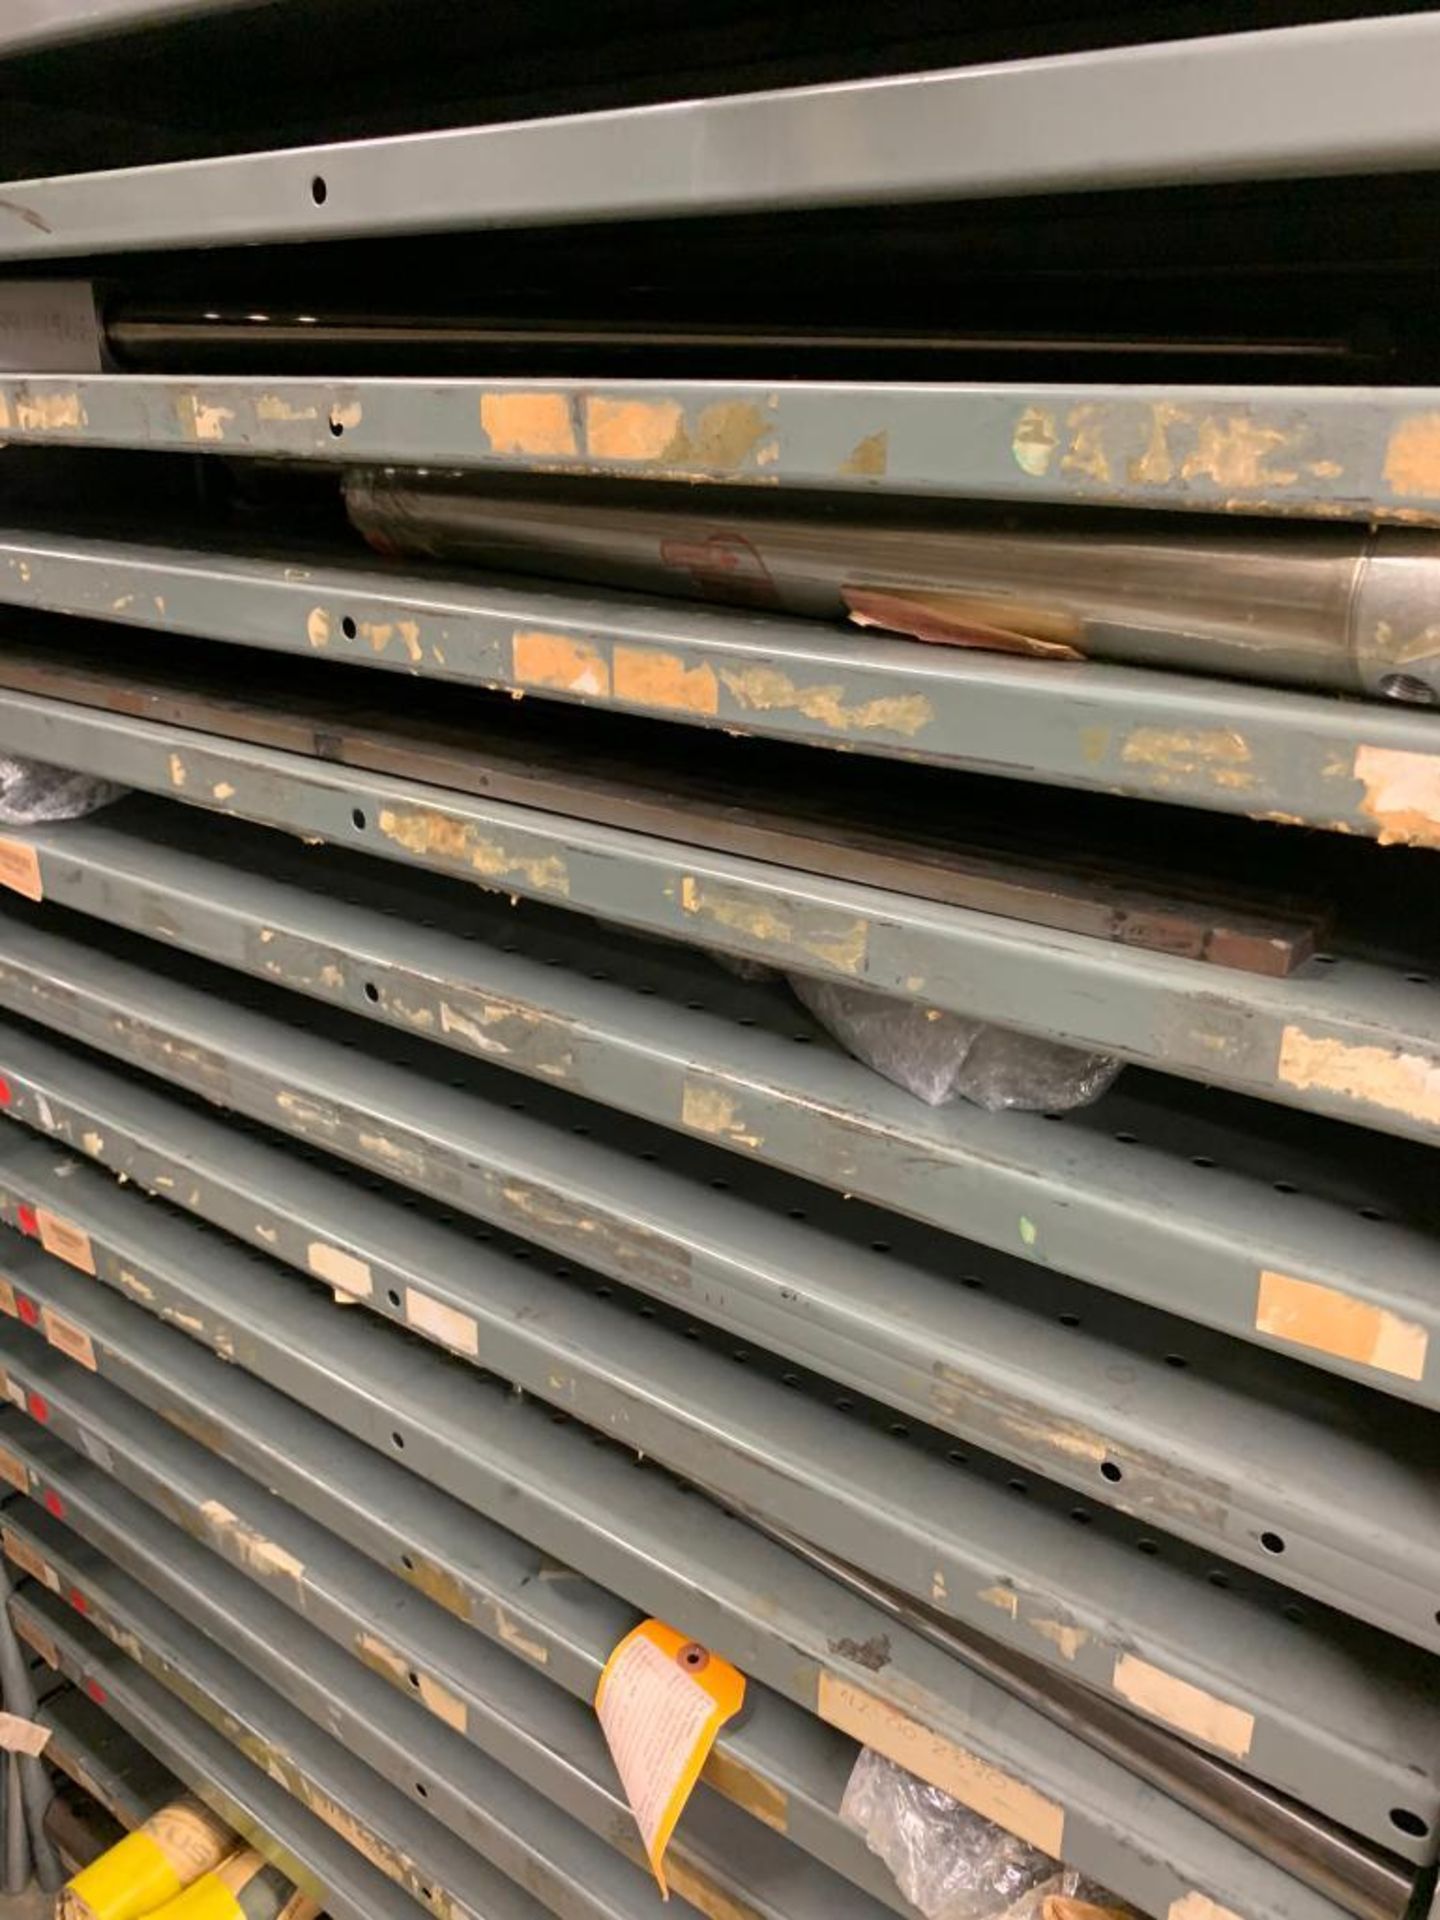 (8x) Bays of Clip Style Shelving w/ Content of Assorted Sleeves, Eaton/ Vickers Valves, Bearing Hous - Image 7 of 45